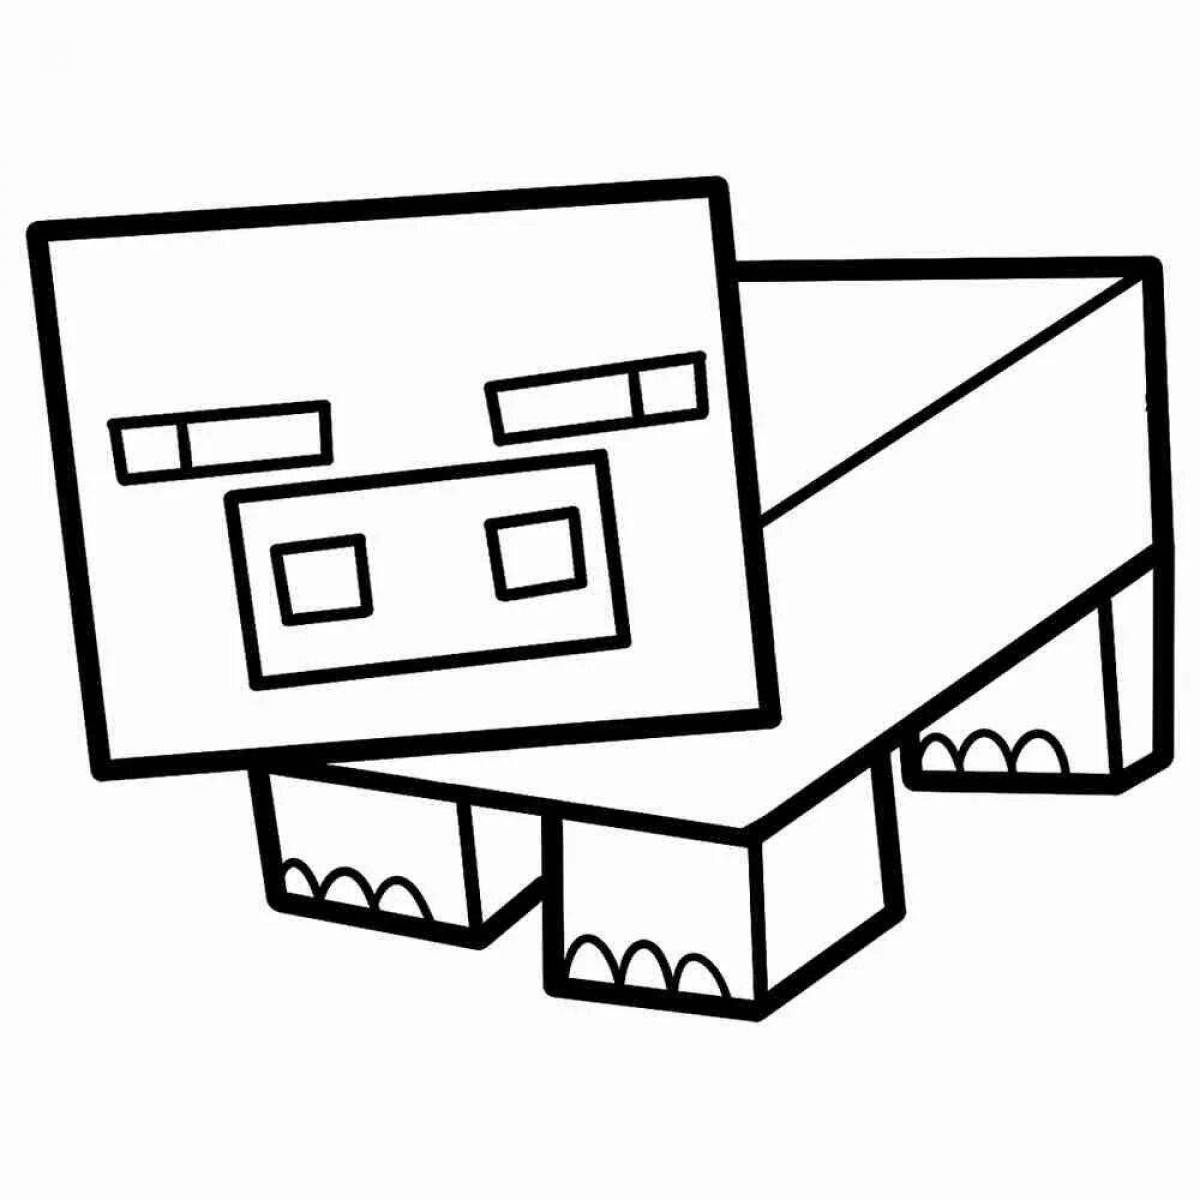 Funny minecraft fish coloring page